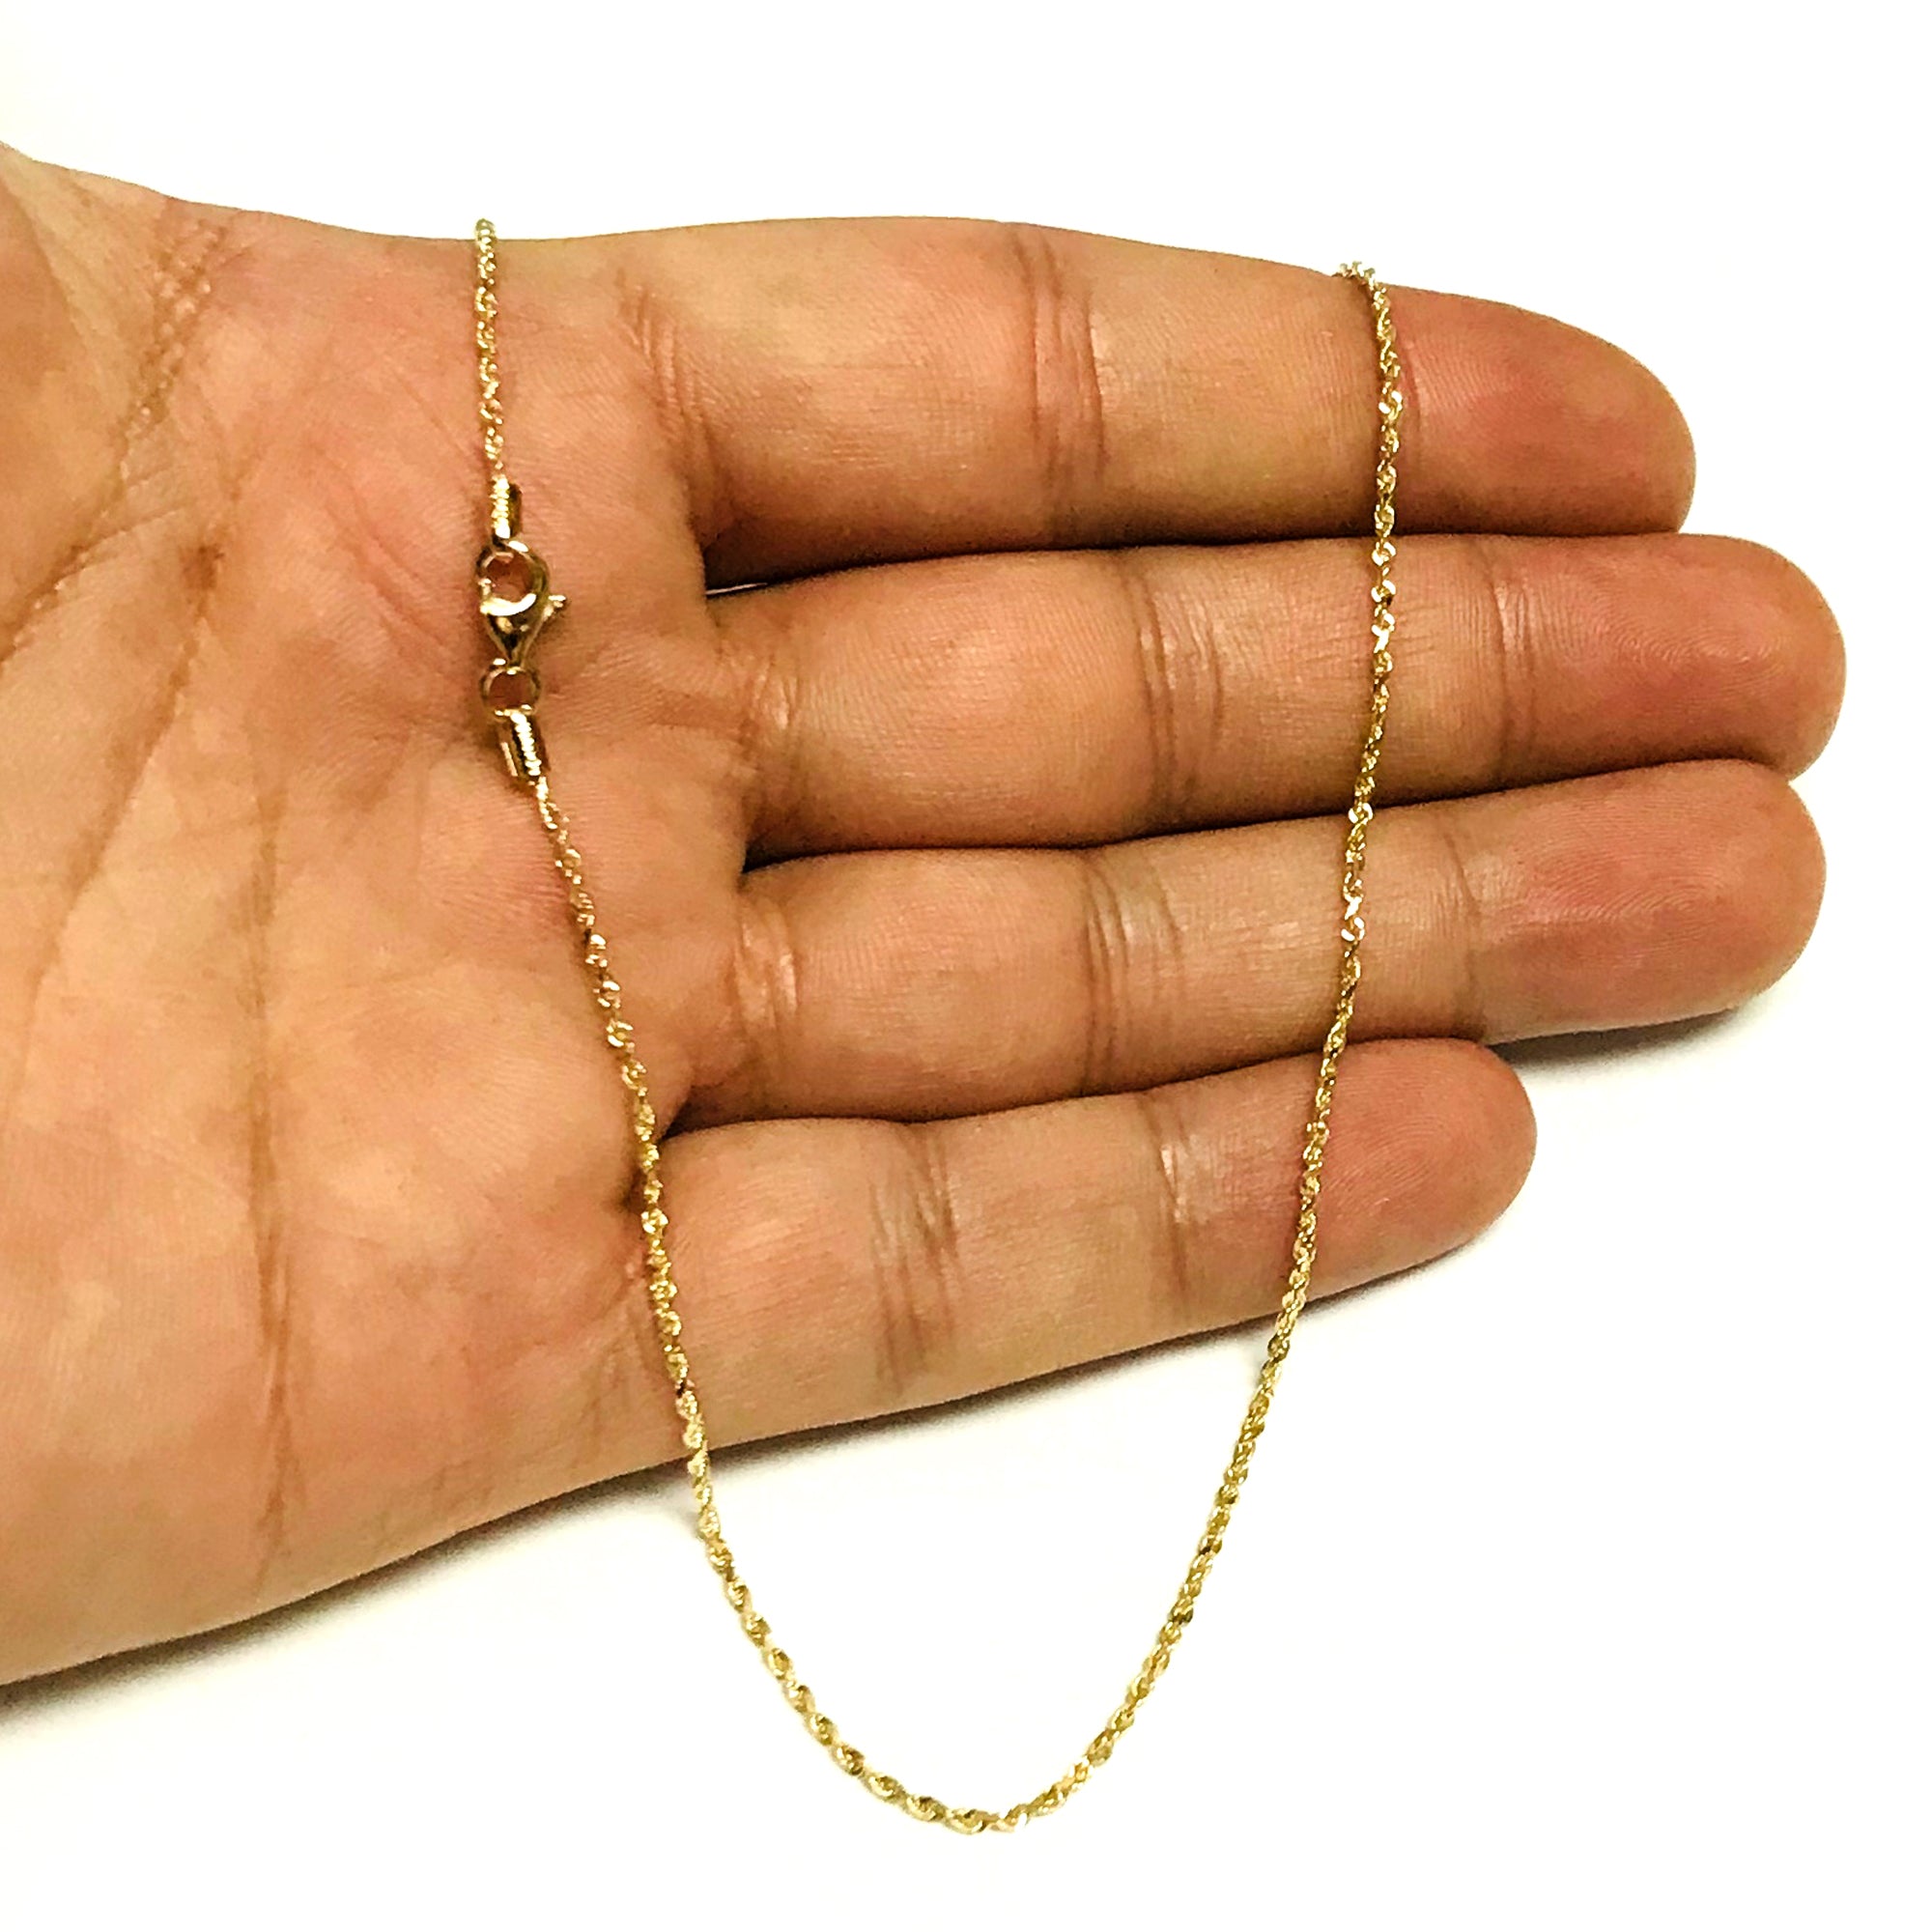 14k Yellow Solid Gold Diamond Cut Rope Chain Necklace , 1.25mm